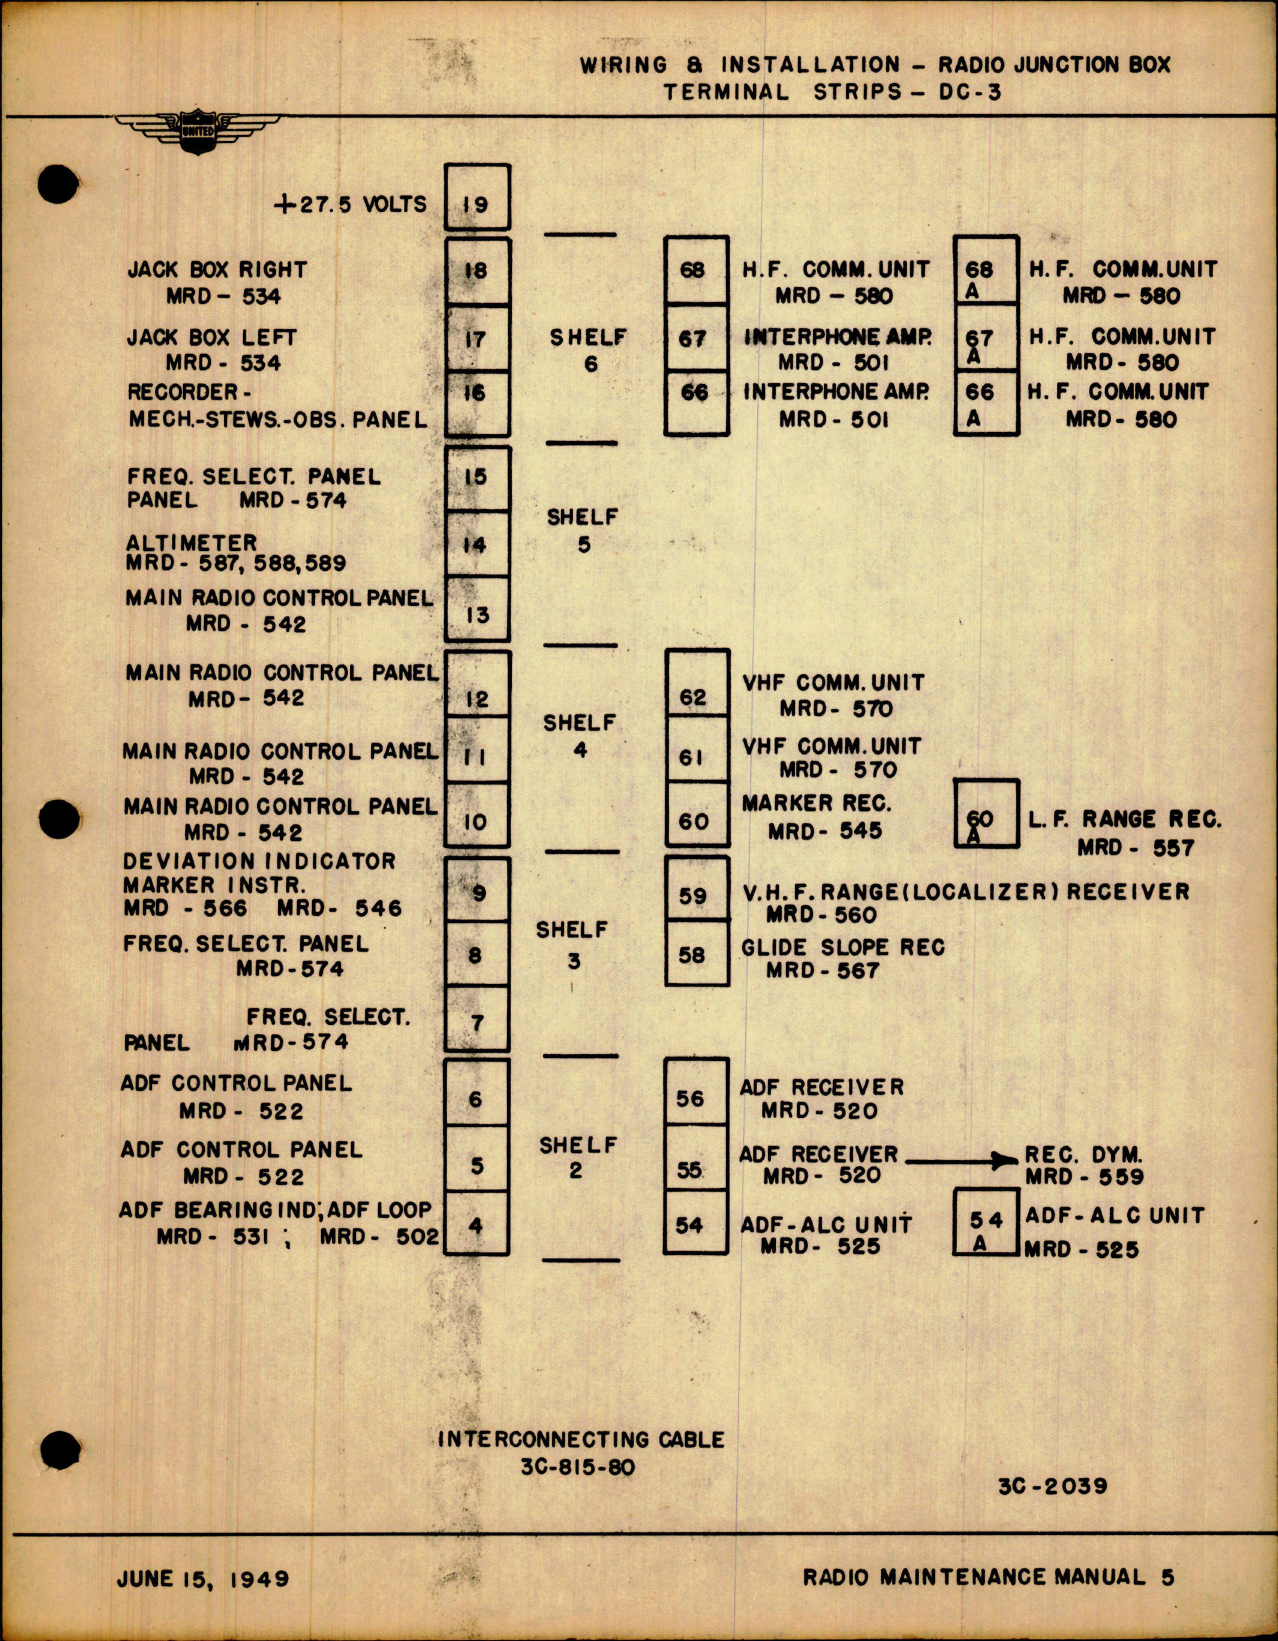 Sample page 9 from AirCorps Library document: Radio Maintenance Manual for DC-3, C-54, DC-6 and B-377